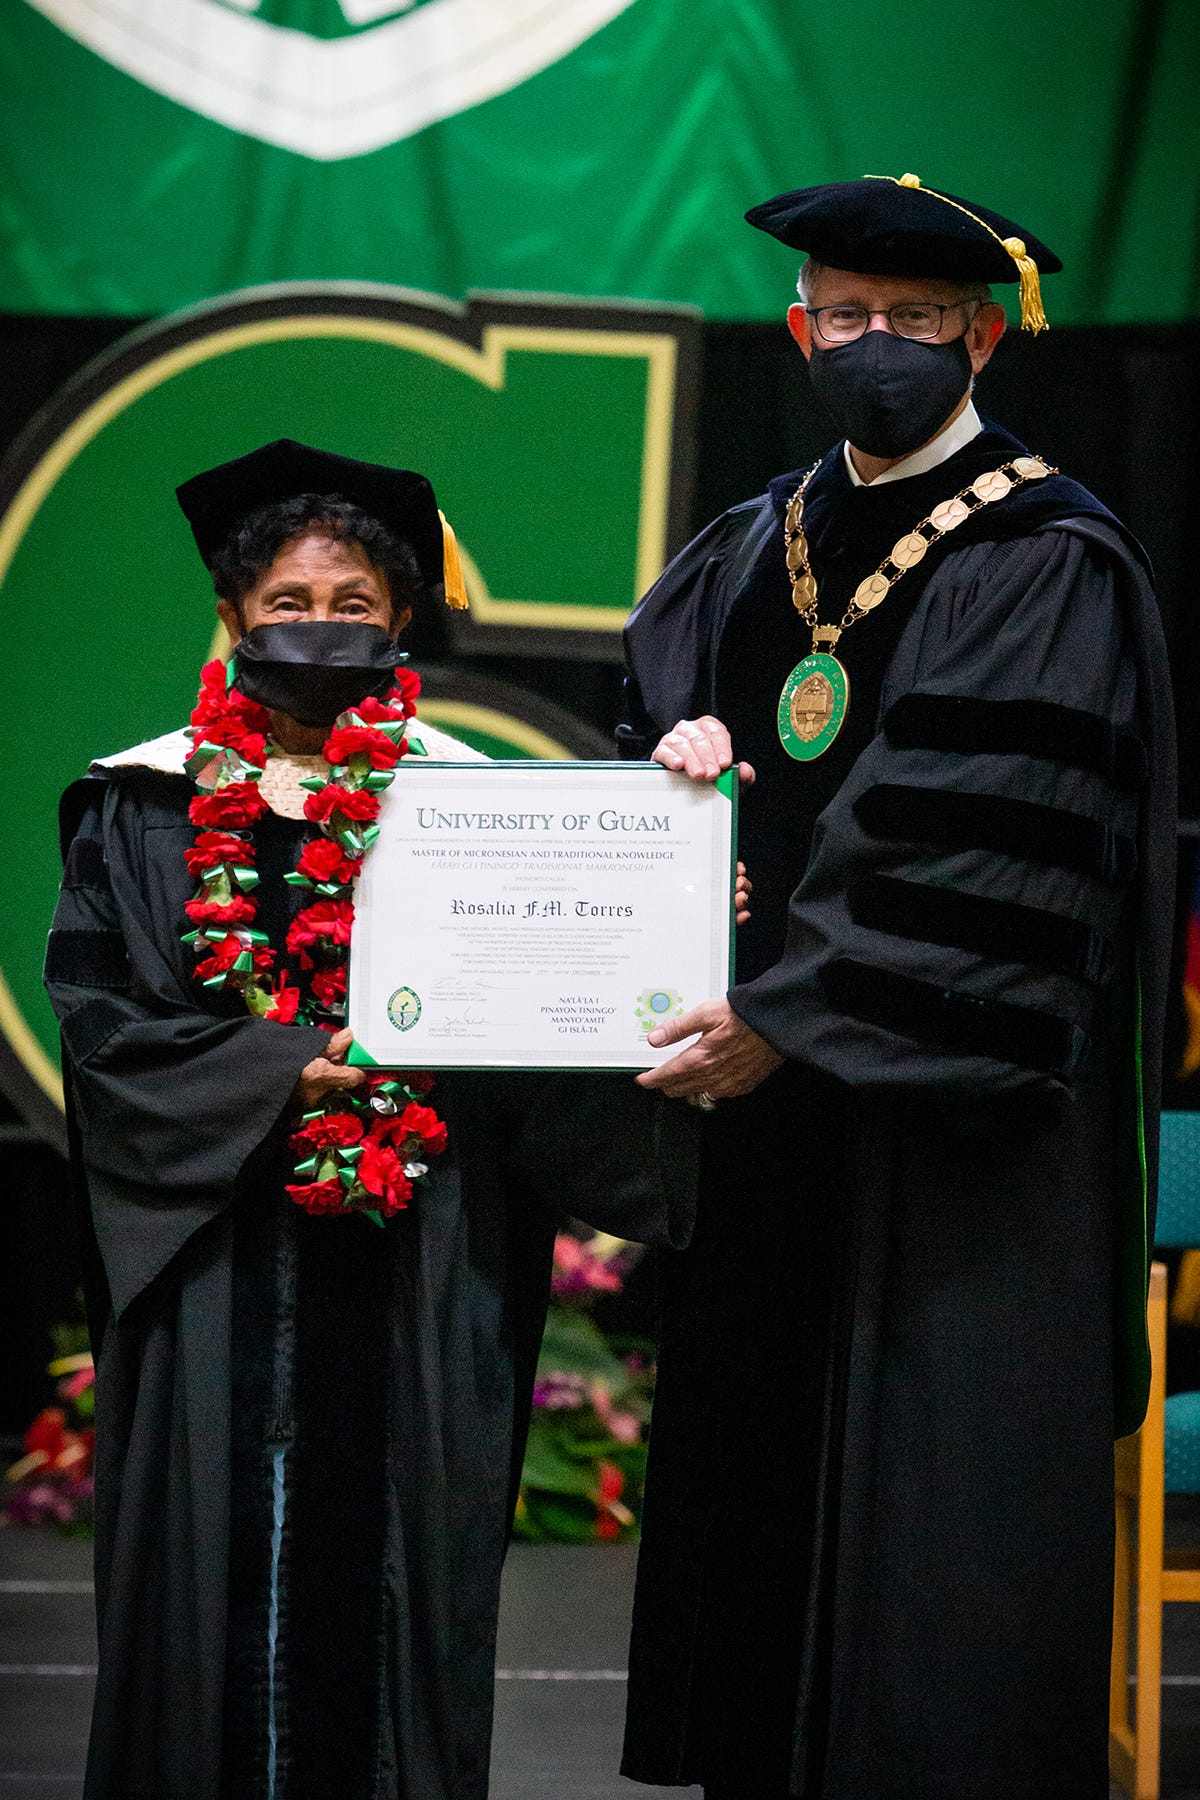 Rosalia Fejeran Mateo, one of a few remaining traditional healers, received an honorary Master of Micronesian Traditional Knowledge degree from the University of Guam Board of Regents during the commencement ceremony in December 2020.